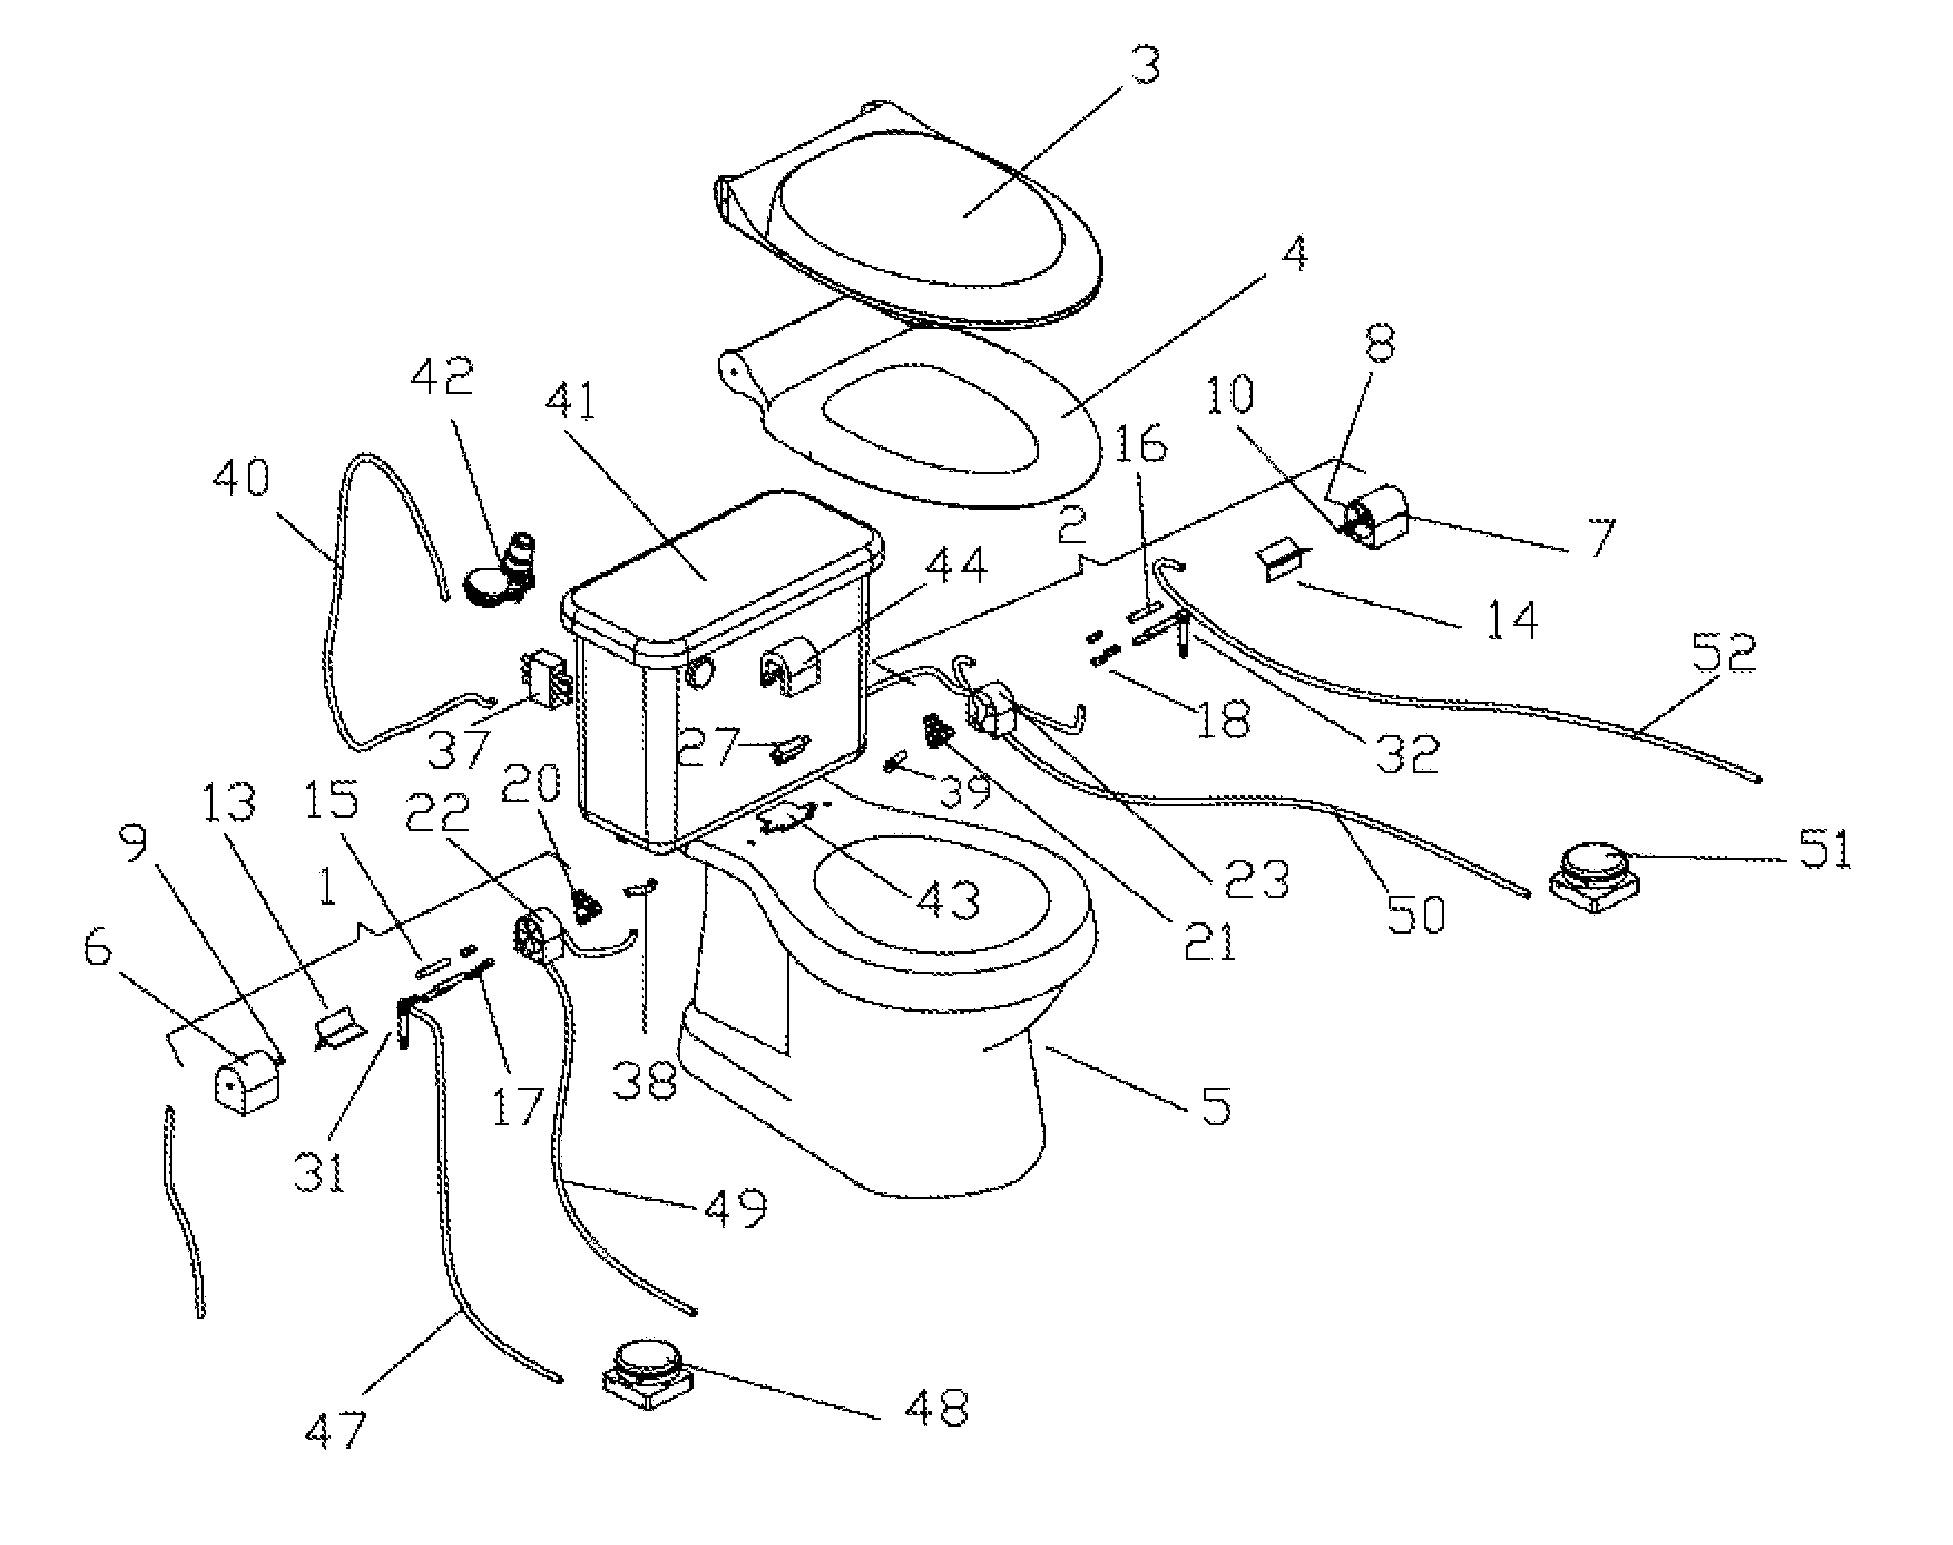 Hydraulic atuator device for raising and lowering a seat and lid